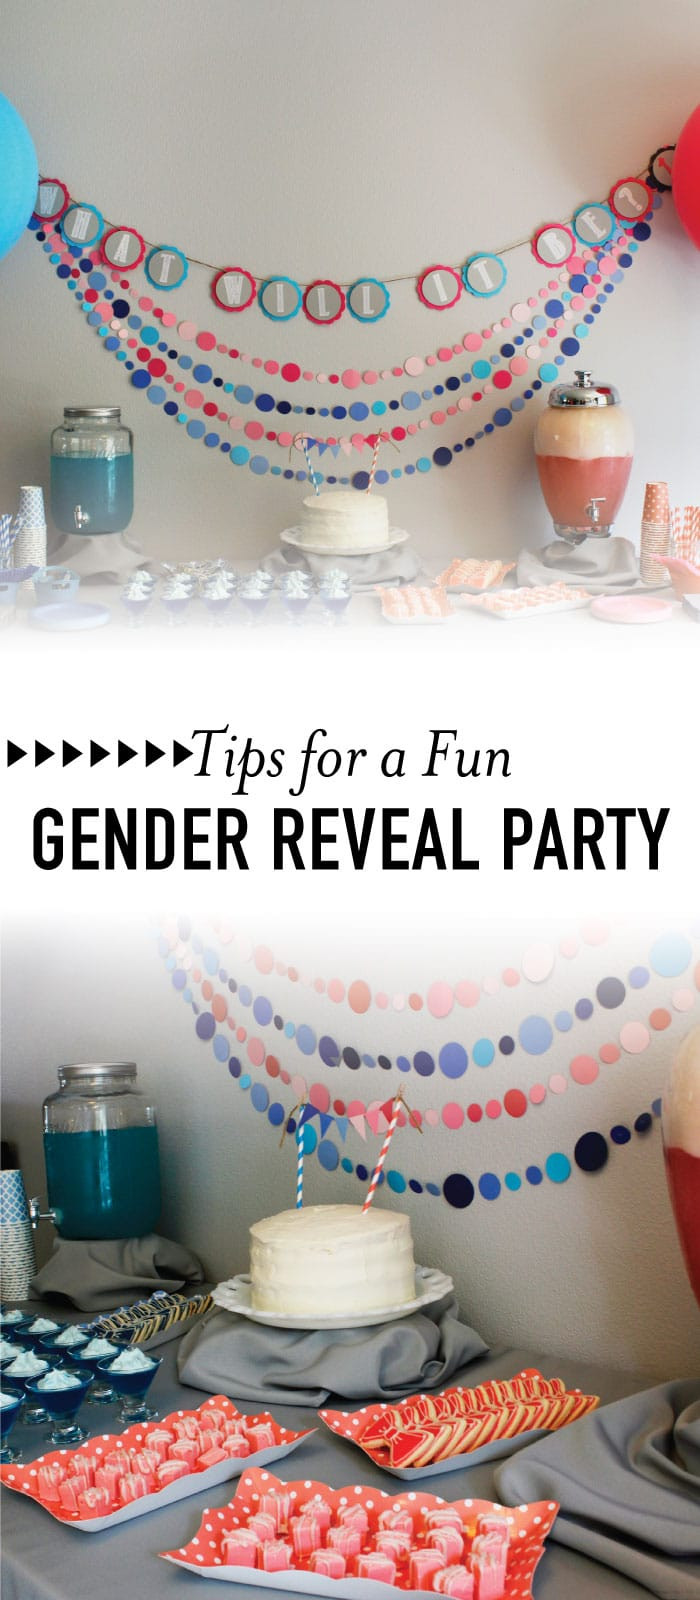 Decoration Ideas For Gender Reveal Party
 Tips for a DIY Gender Reveal Party